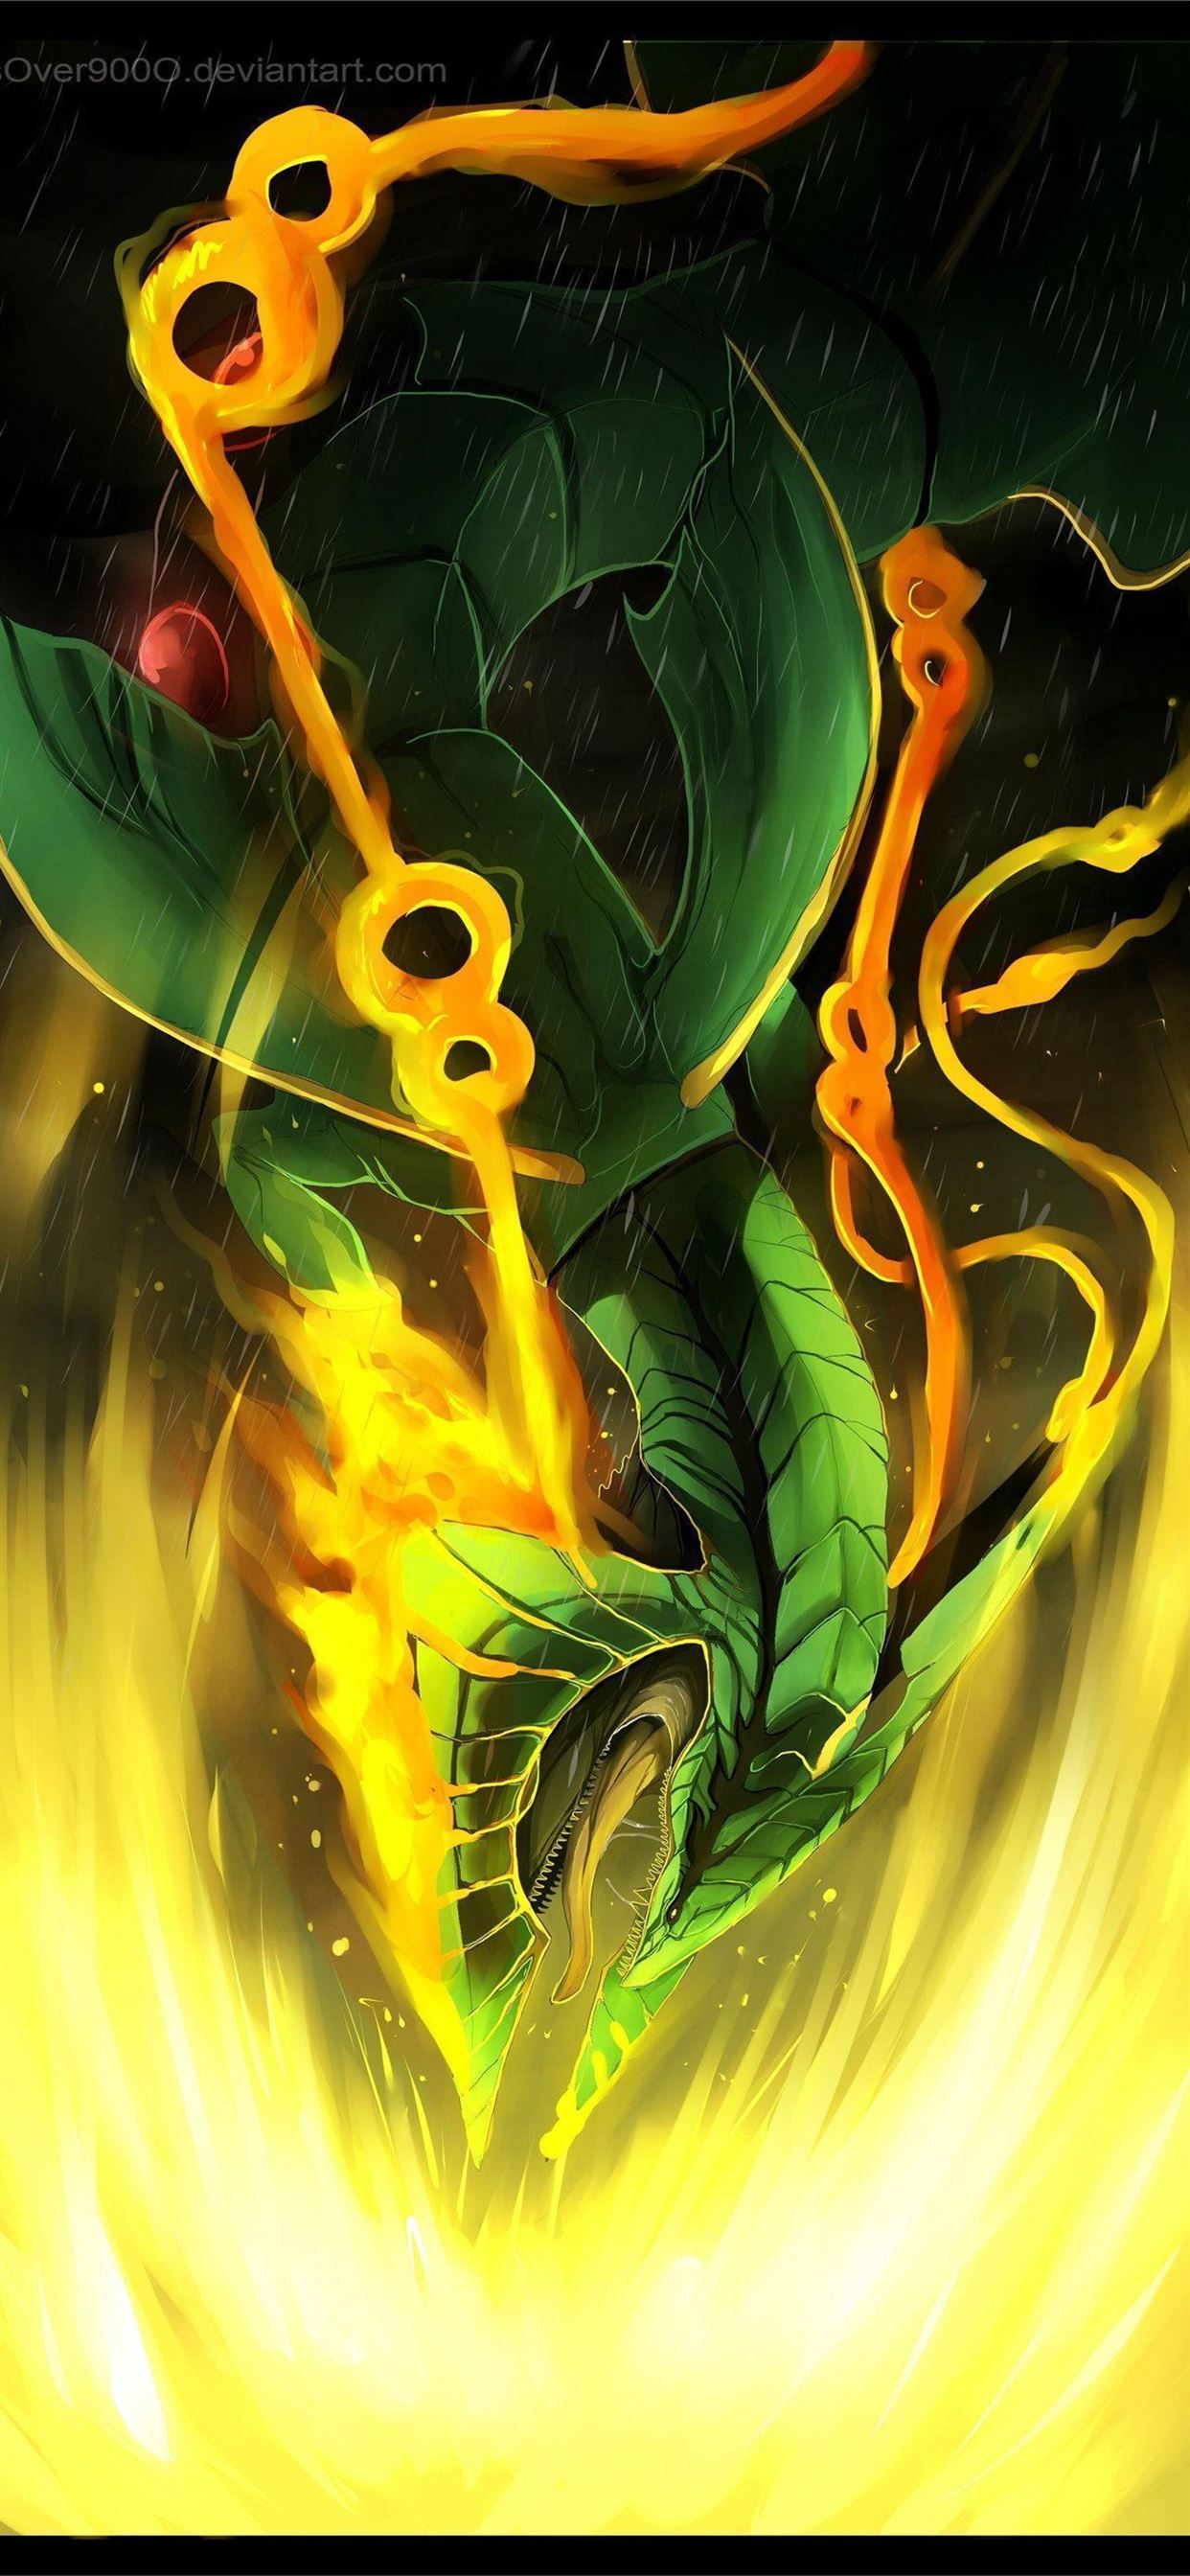 Download Rayquaza (Pokémon) wallpapers for mobile phone, free Rayquaza  (Pokémon) HD pictures